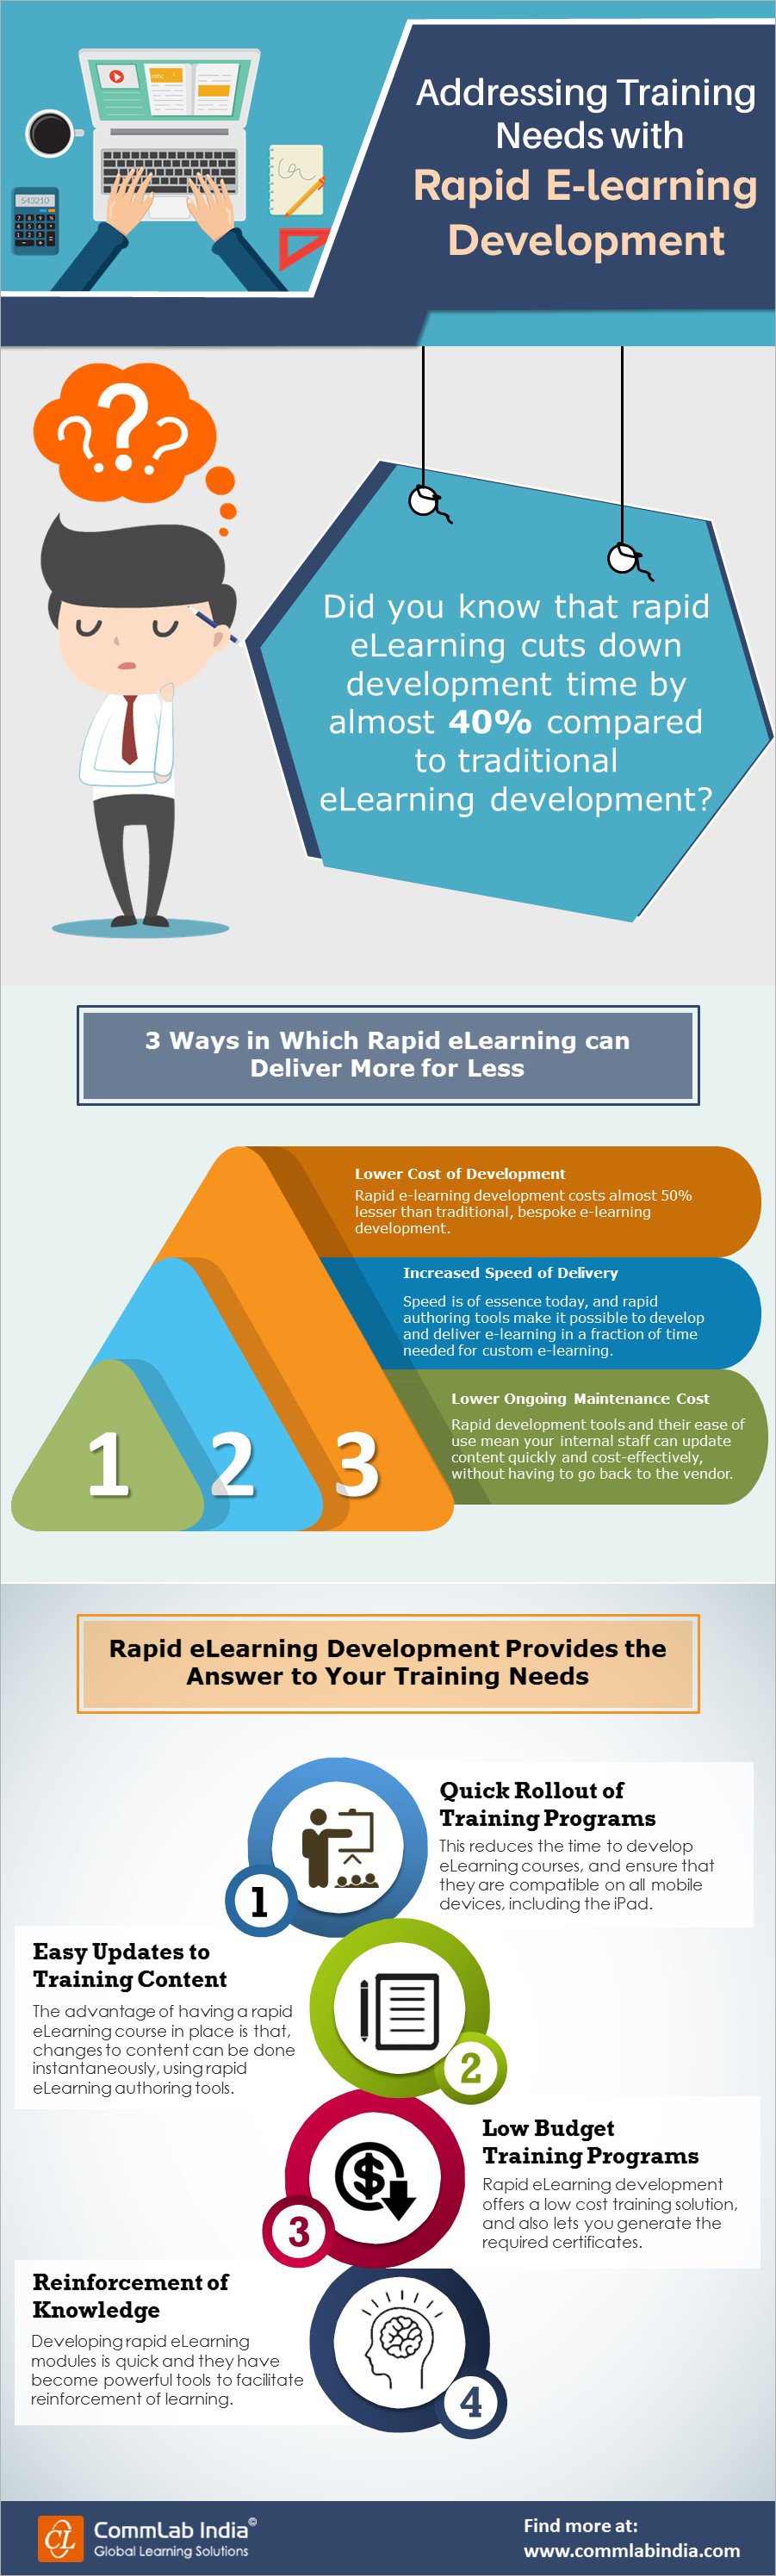 Addressing Online Training Needs with Rapid E-learning Development [Infographic]